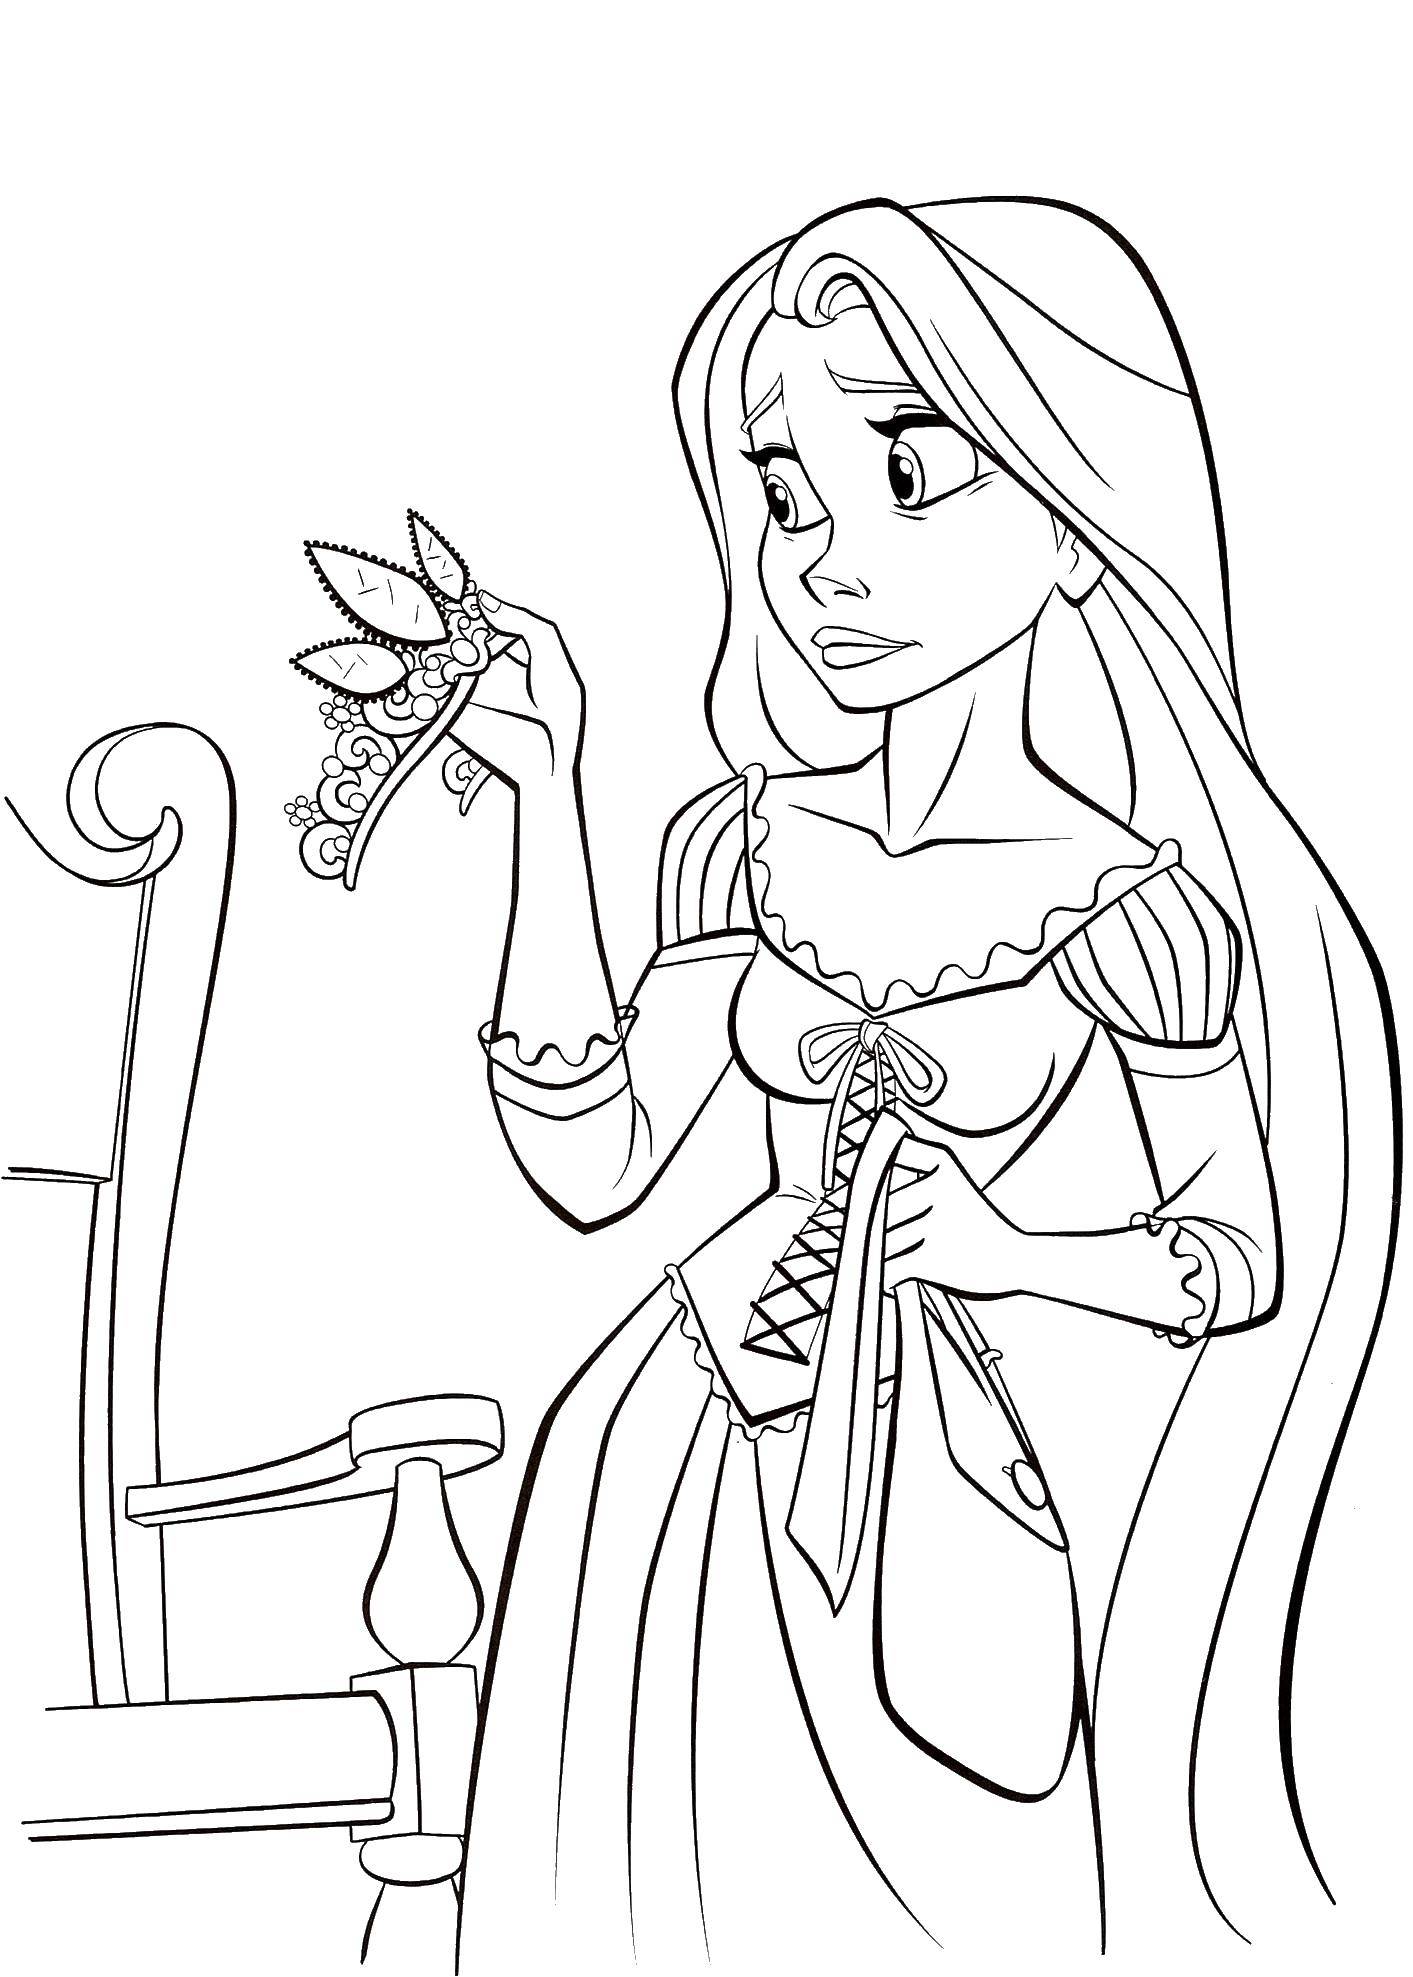 Coloring Rapunzel tries on the crown. Category Disney coloring pages. Tags:  Rapunzel .